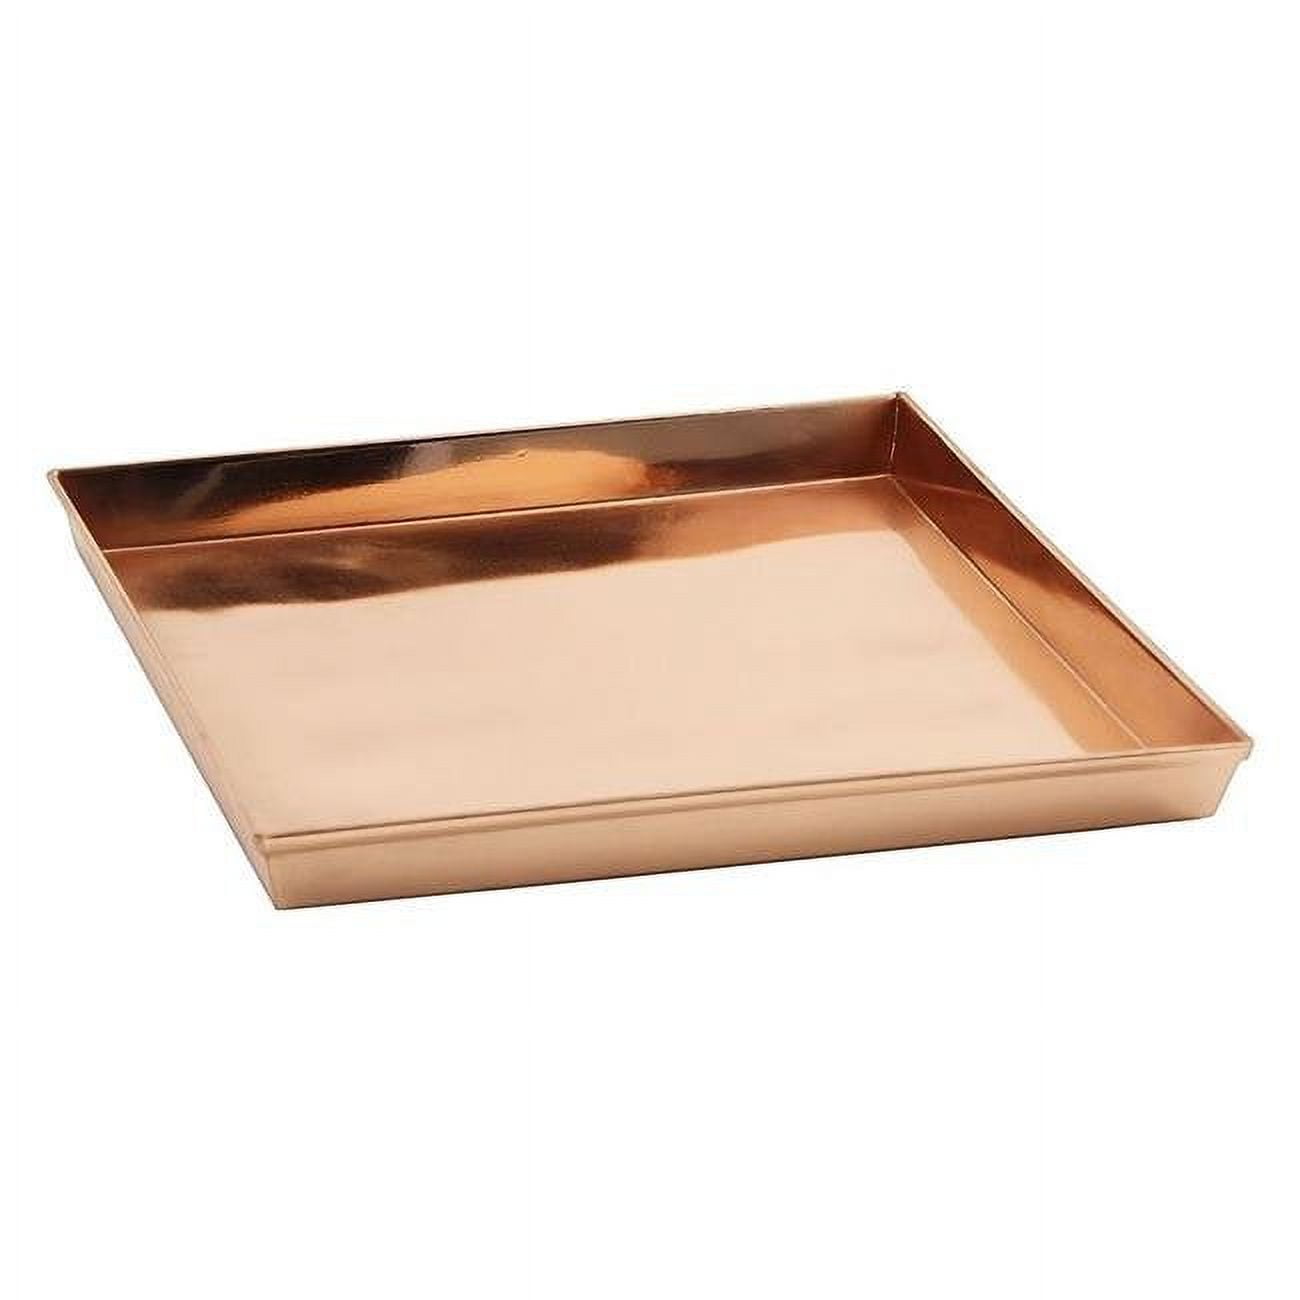 Mintueman-achla Try-s10 10 In. Square Tray, Copper